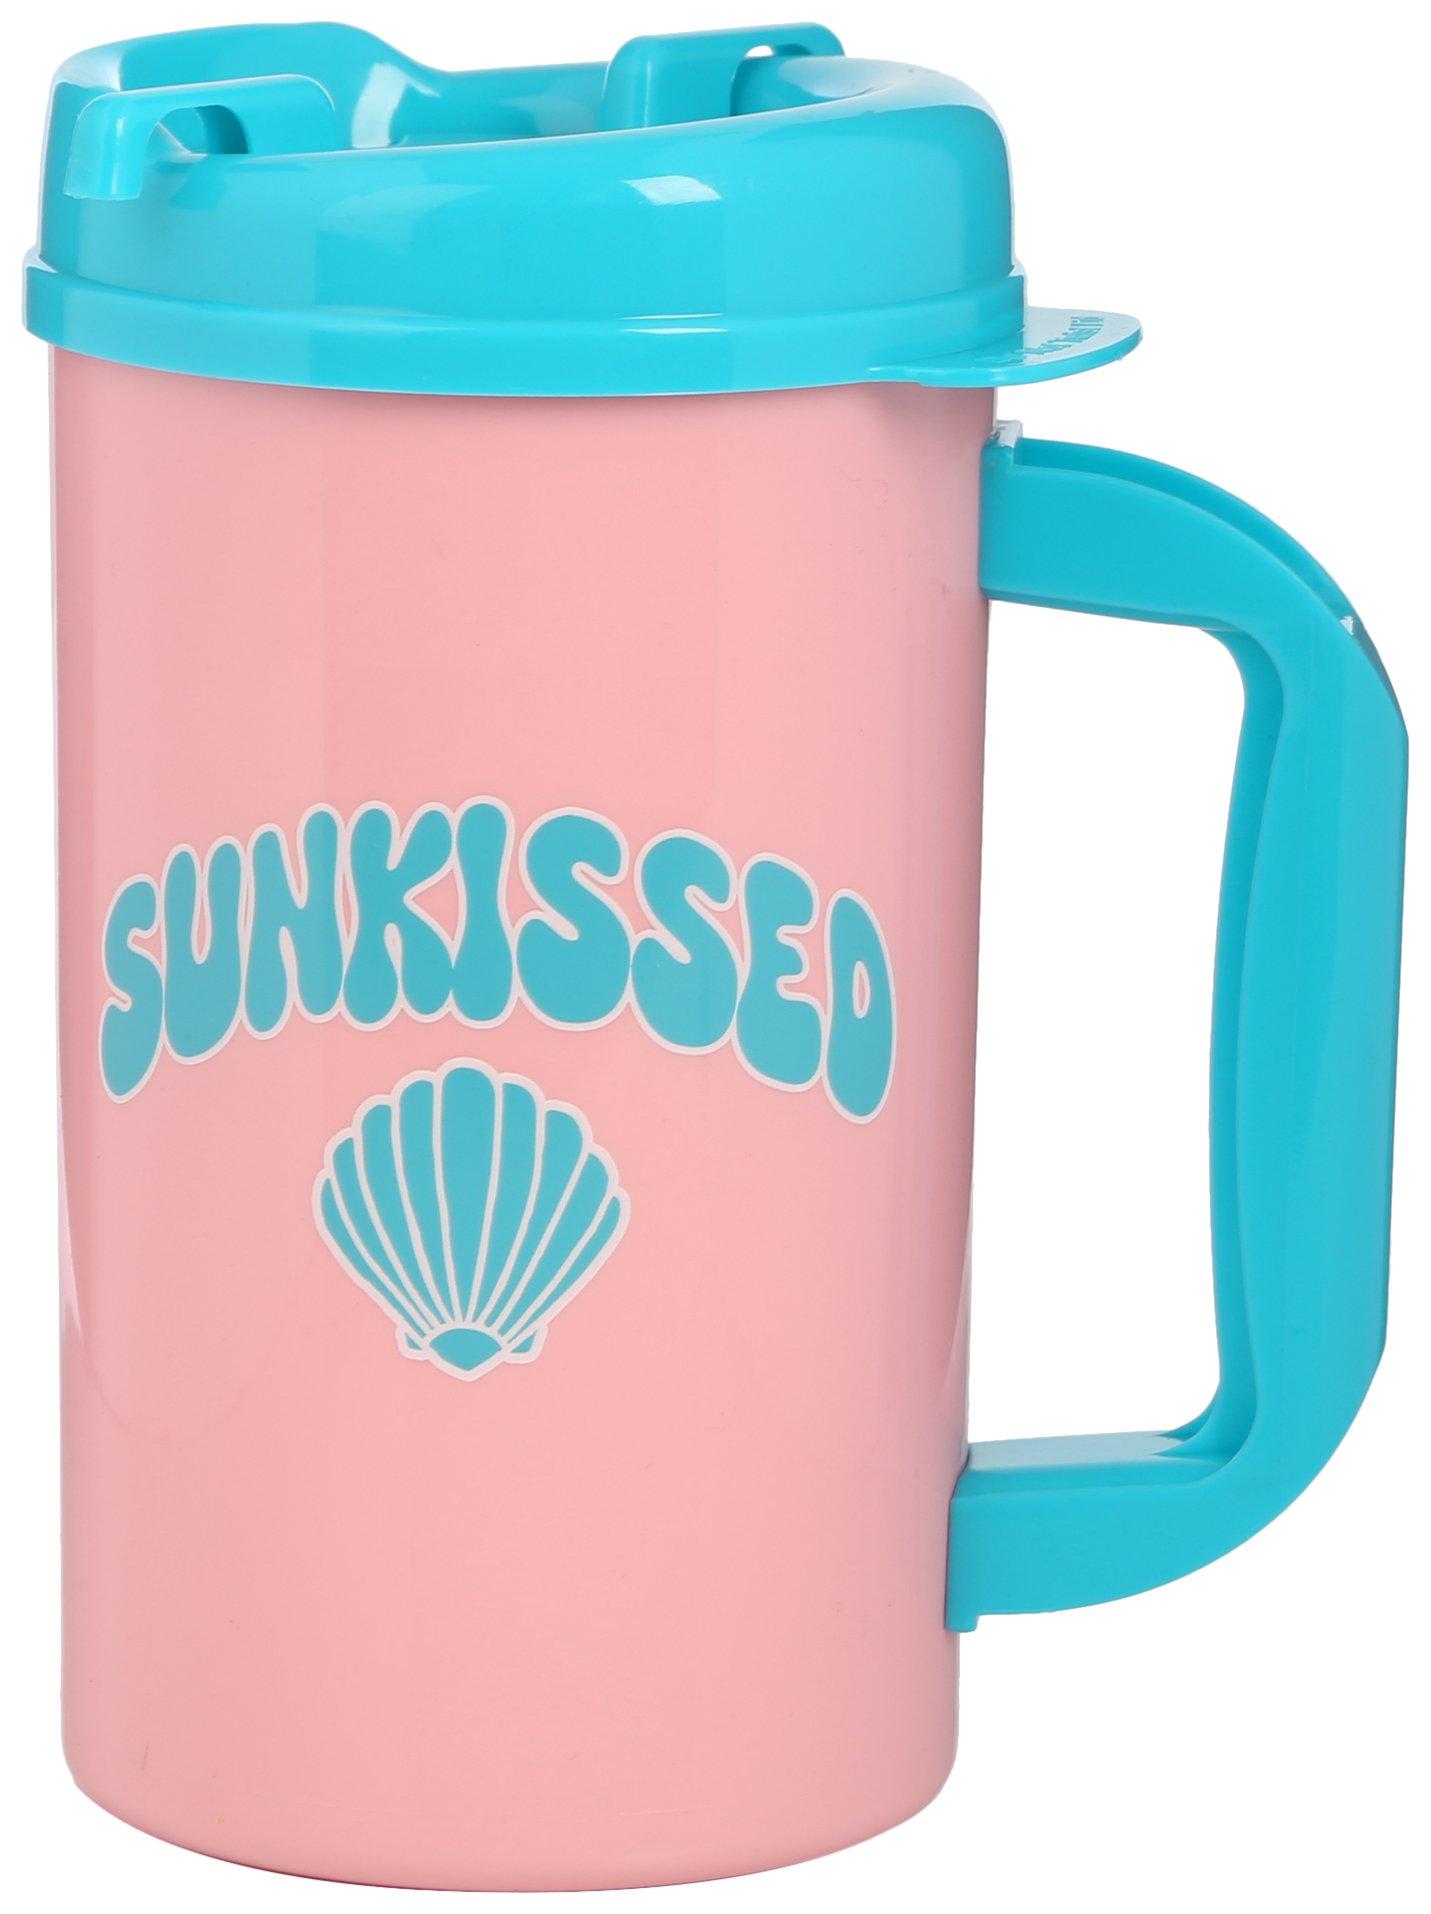 Simply Southern 32 oz. Sunkissed Drinking Mug